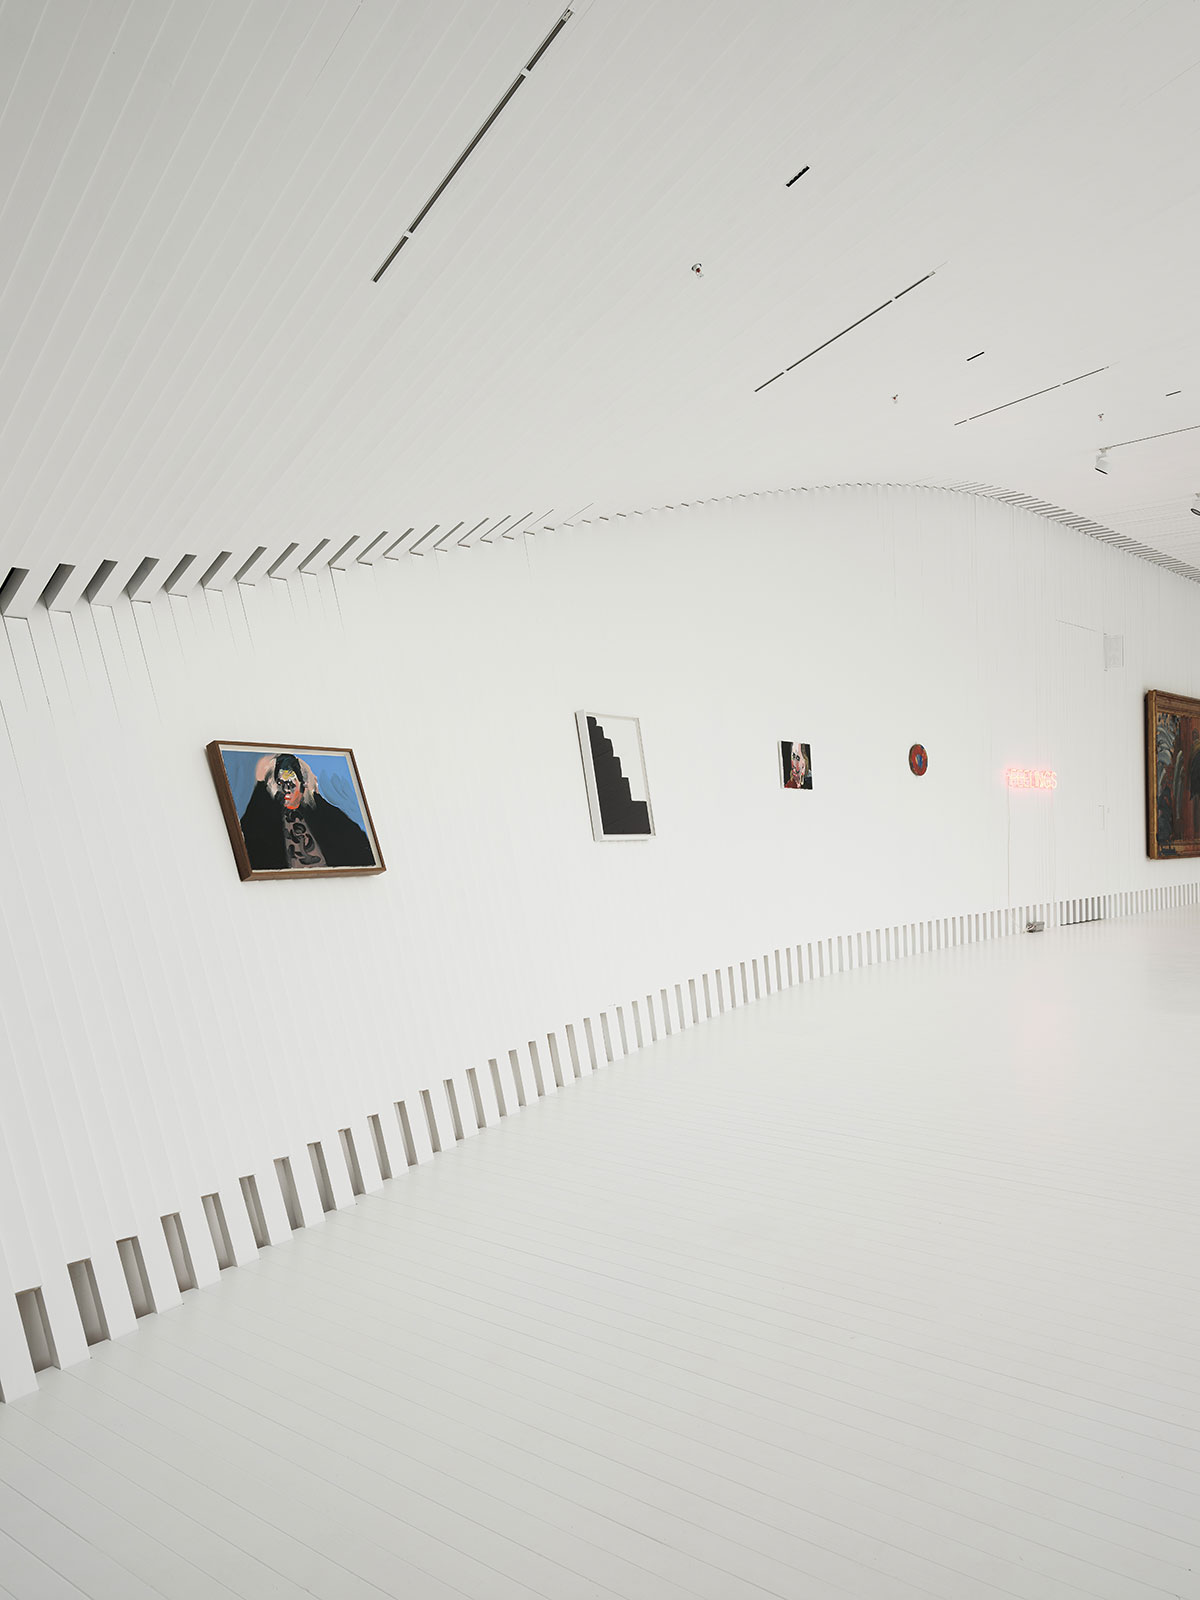 Hodgkin and Creed – Inside Out Exhibition. Photo by Einar Aslaksen.